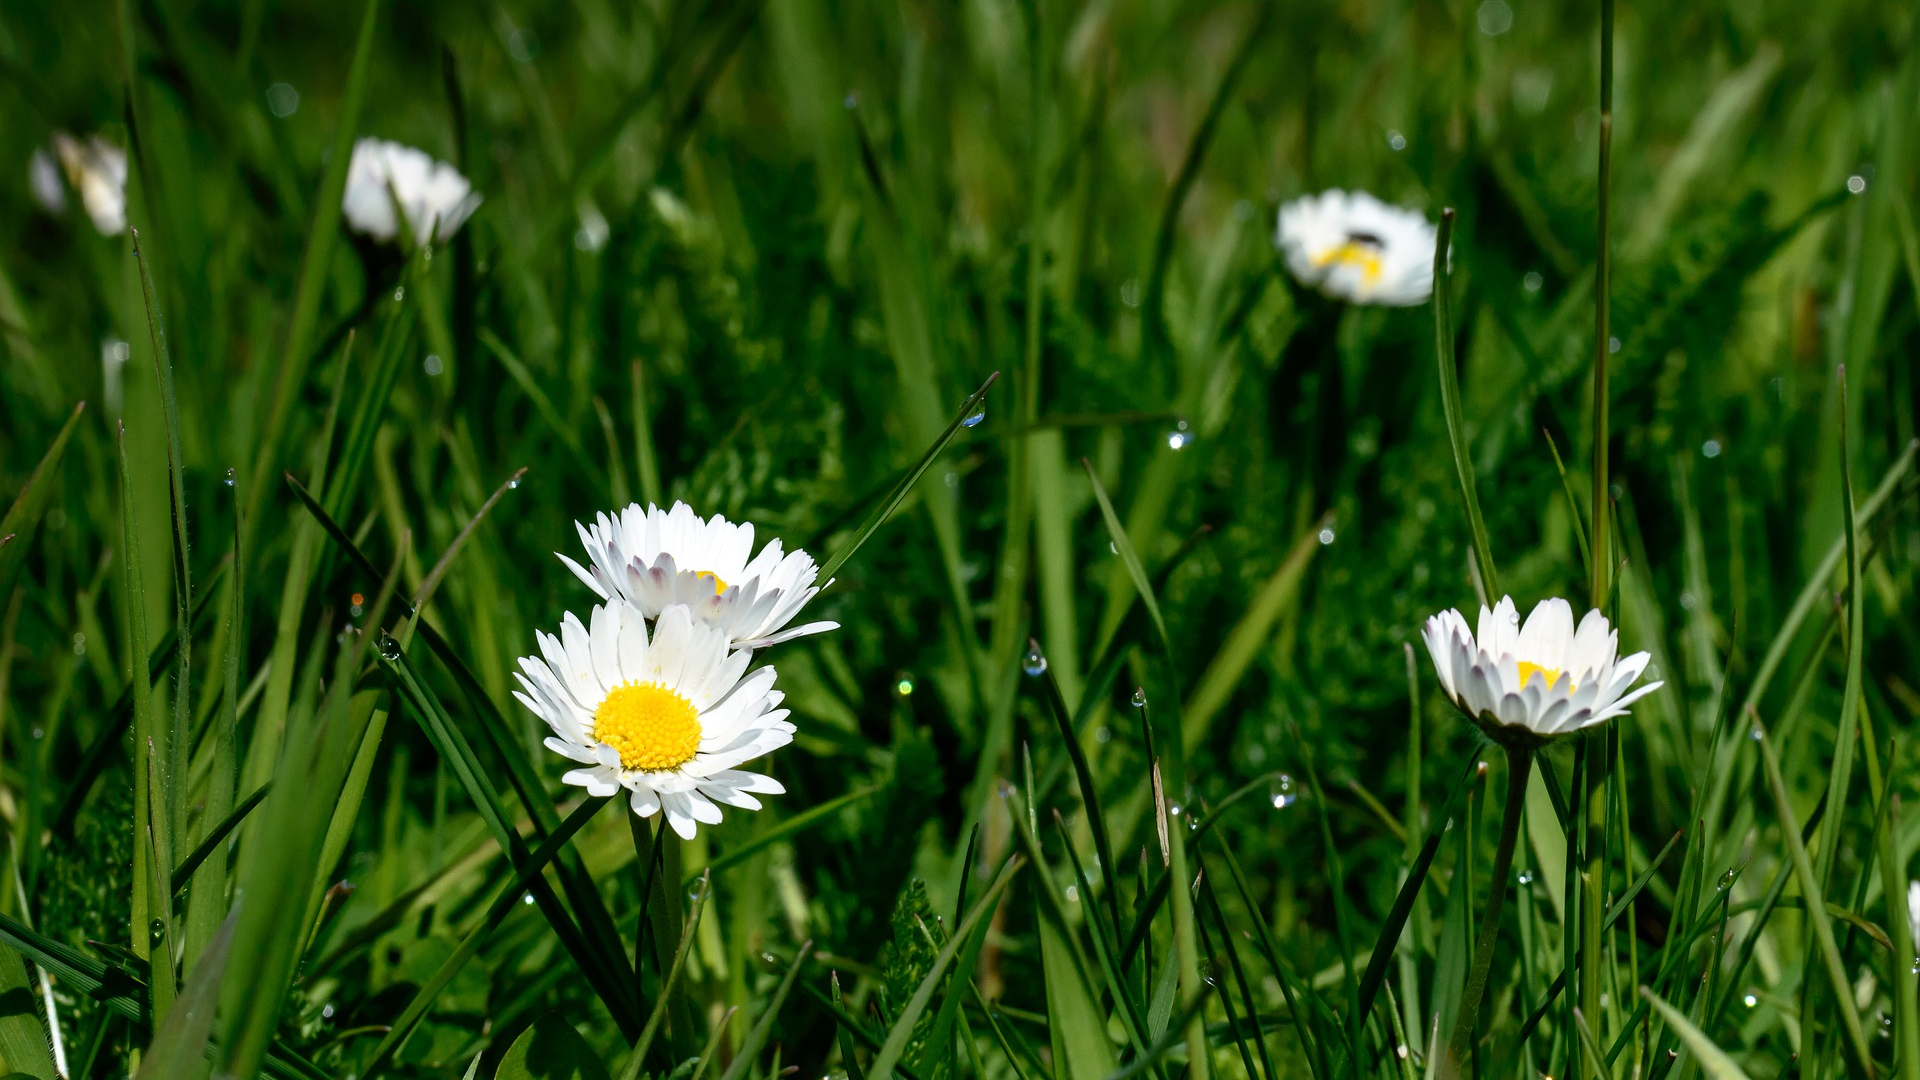 Download 1920x1080 Wallpaper Meadow, Grass, White Daisy Flowers, Full